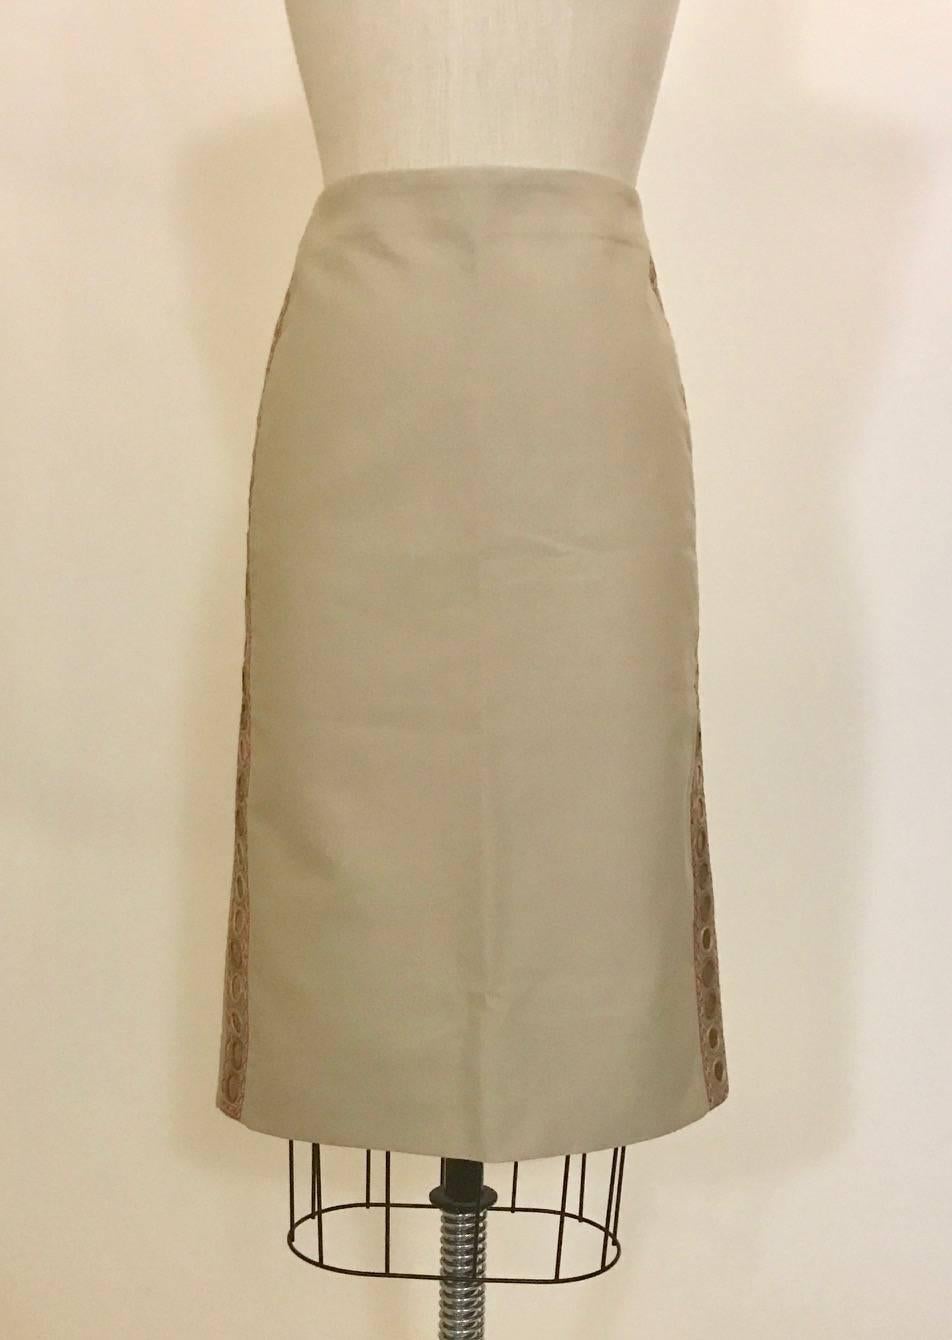 Alexander McQueen embroidered sand colored pencil skirt from his 2004 collection. Embellished with circular distressed mirrors run up each side, inset on a light olive ribbon with pink embroidery. Slit at back center, back zip and hook and eye.